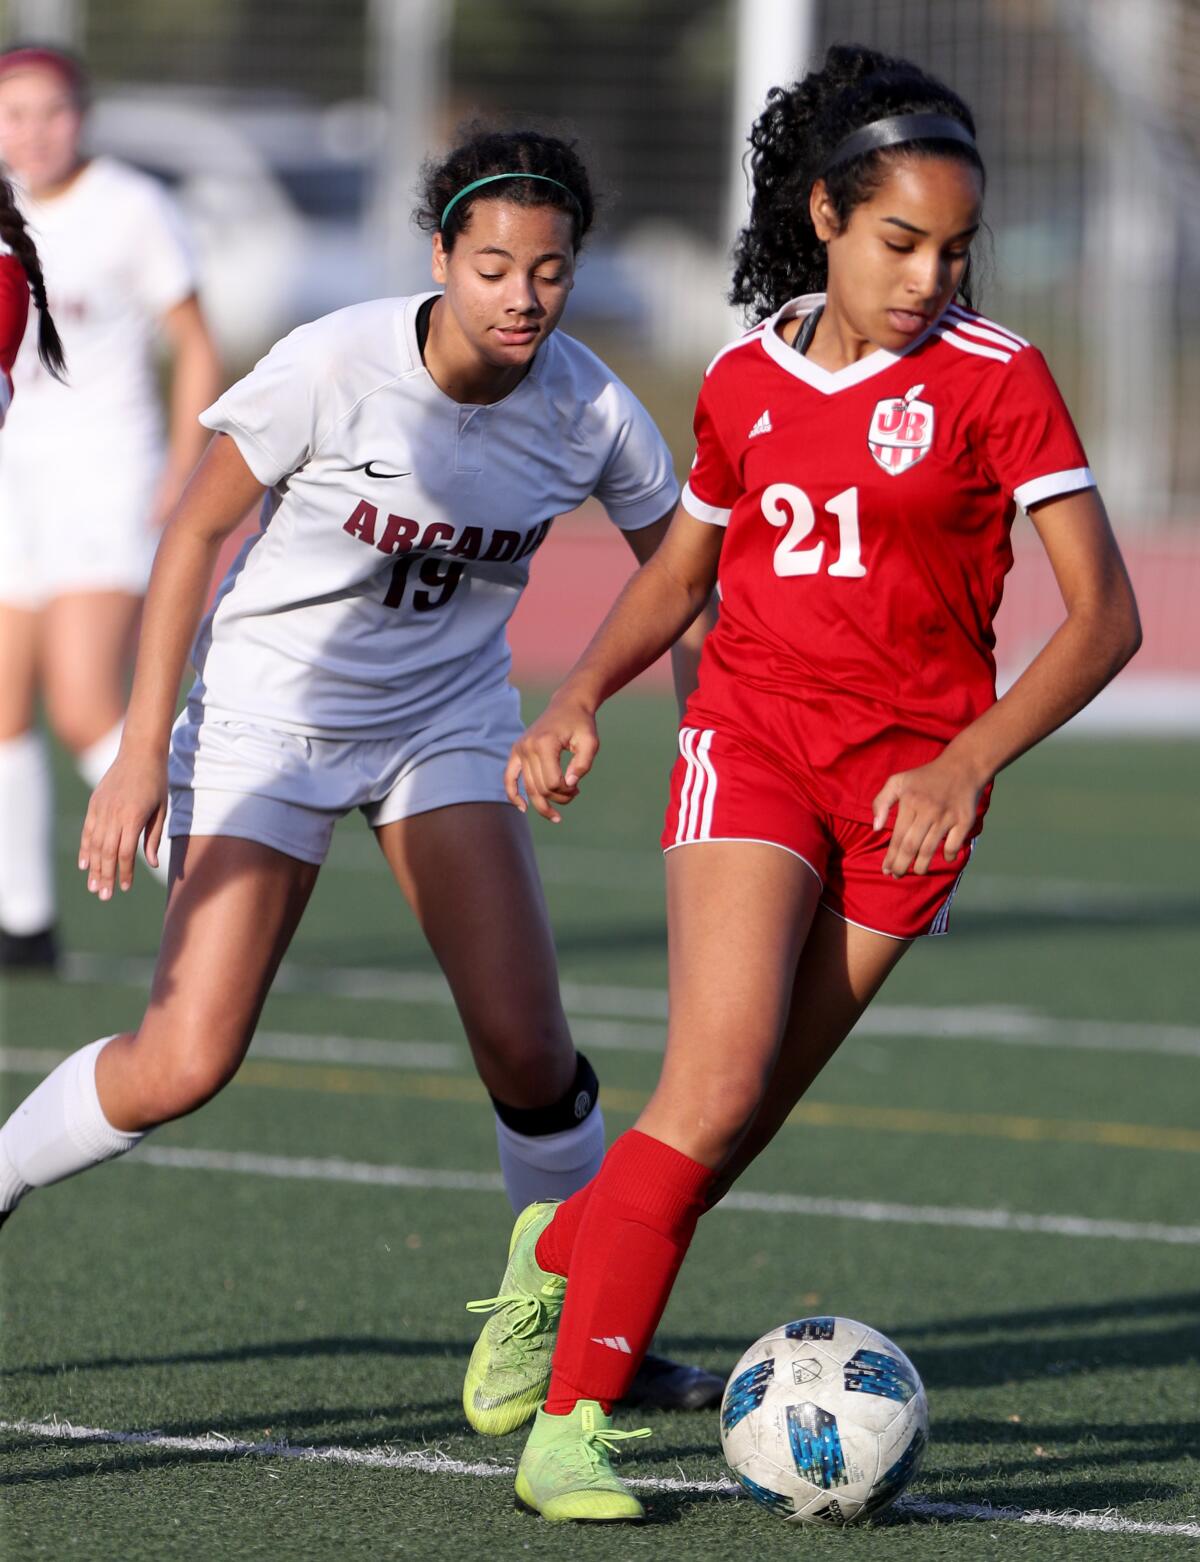 Burbank girls soccer player Lauryn Bailey, right, controls the ball in game vs. Arcadia, at home in Burbank on Tuesday, Jan. 7, 2020.